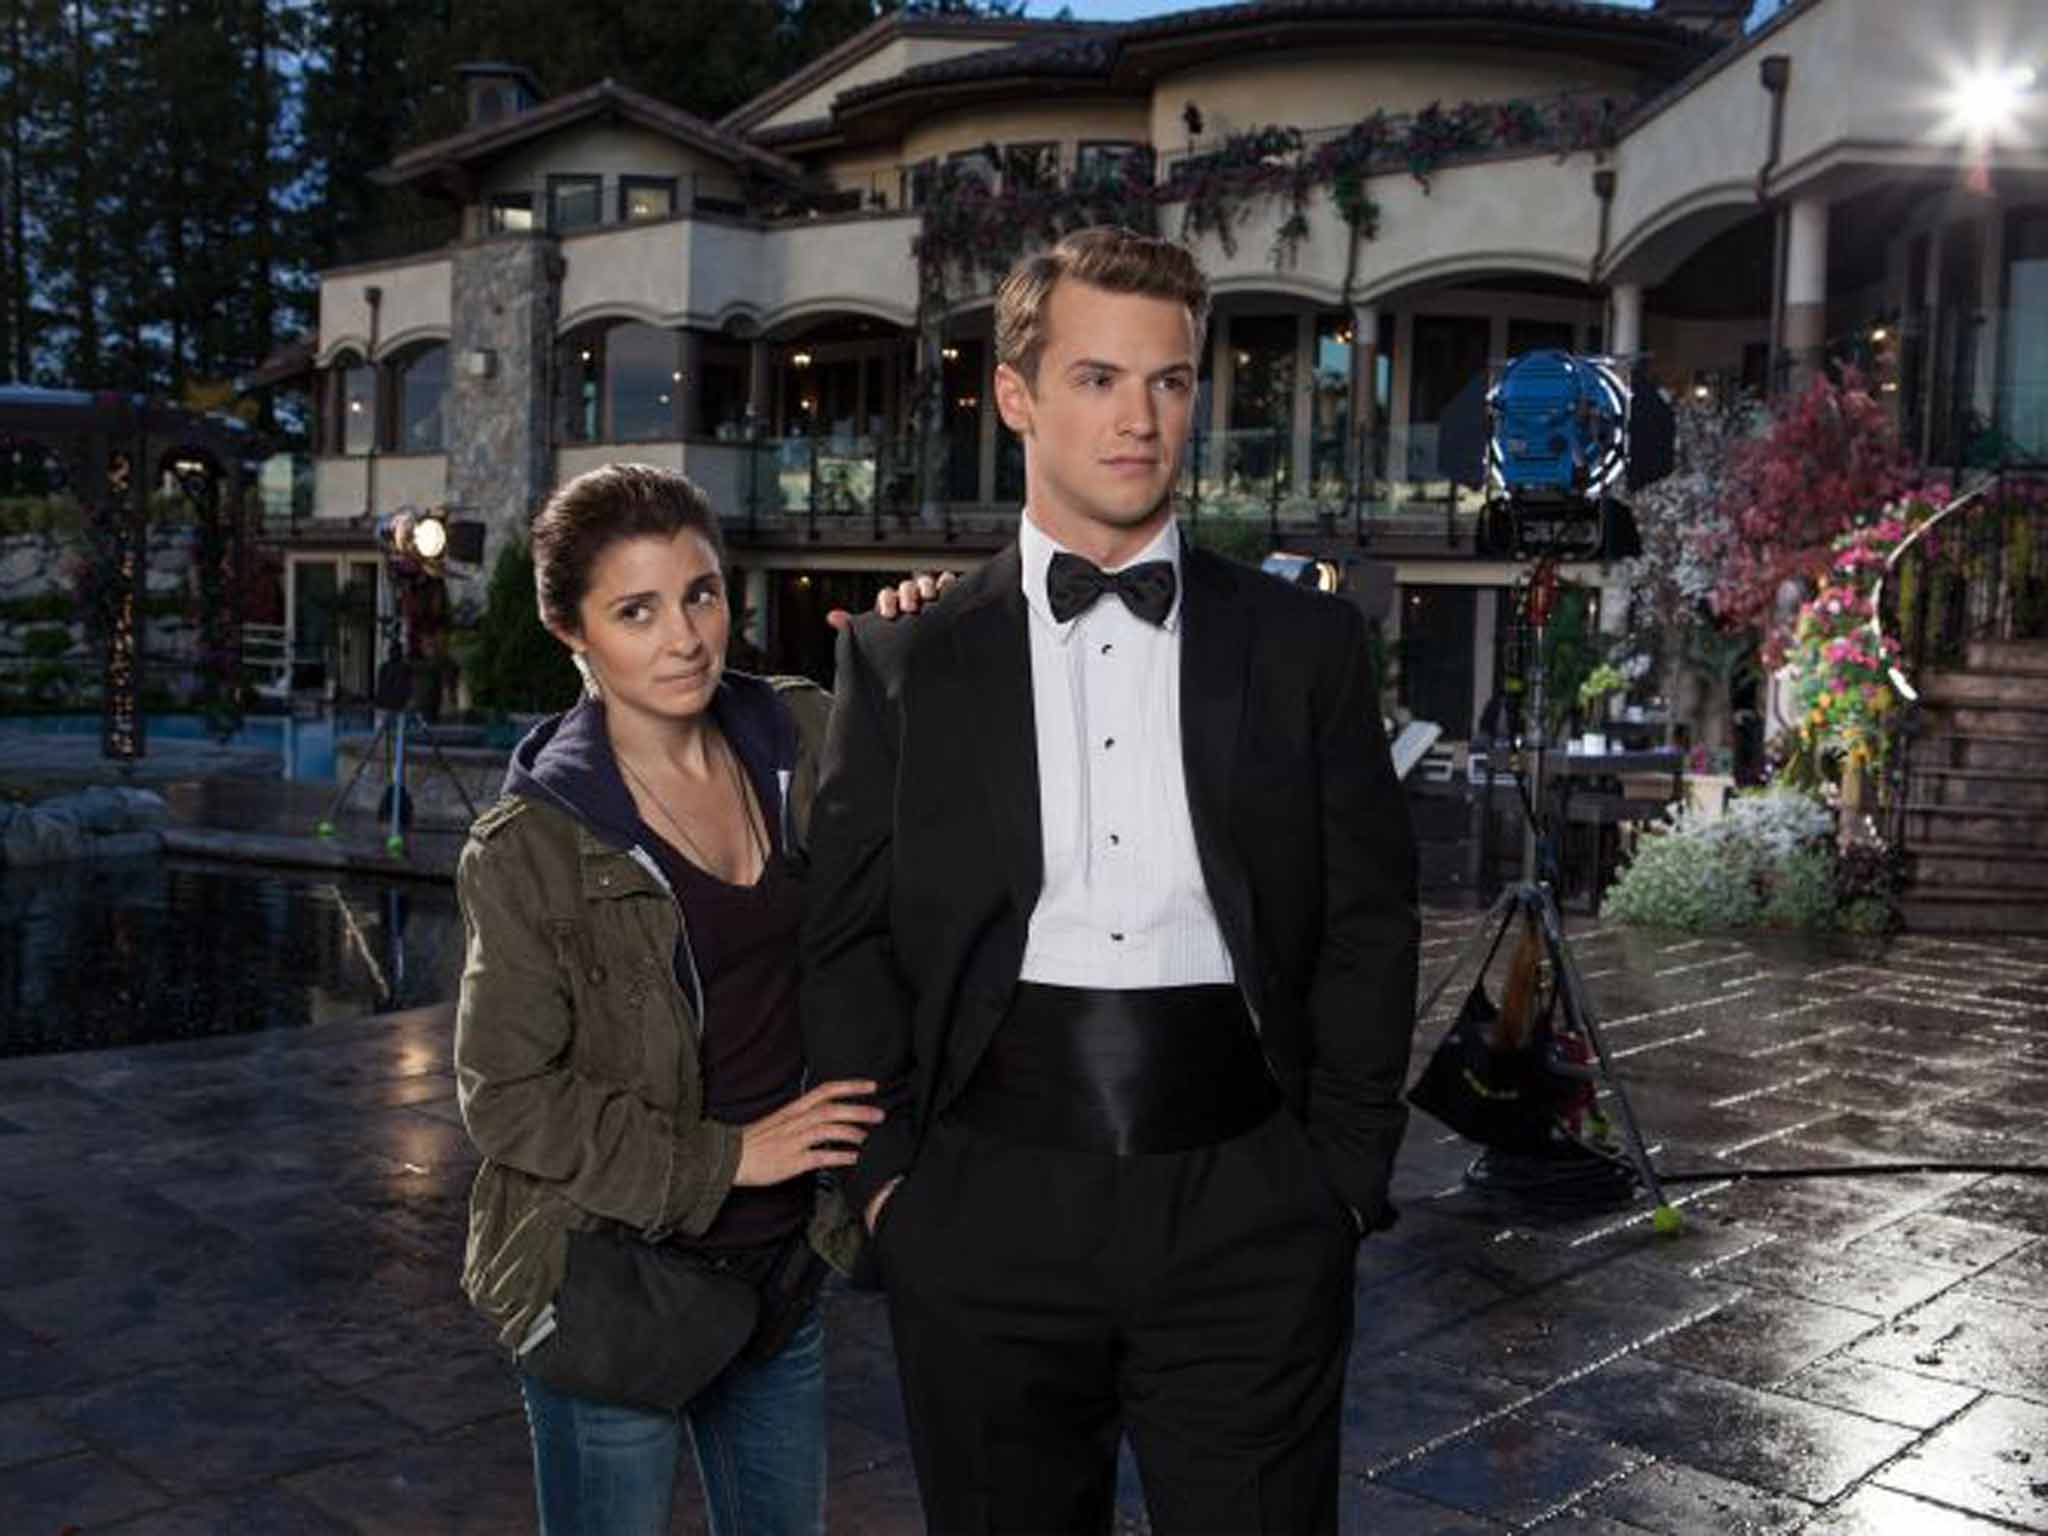 Conflicted: 'UnREAL' follows a reality television producer's moral struggles